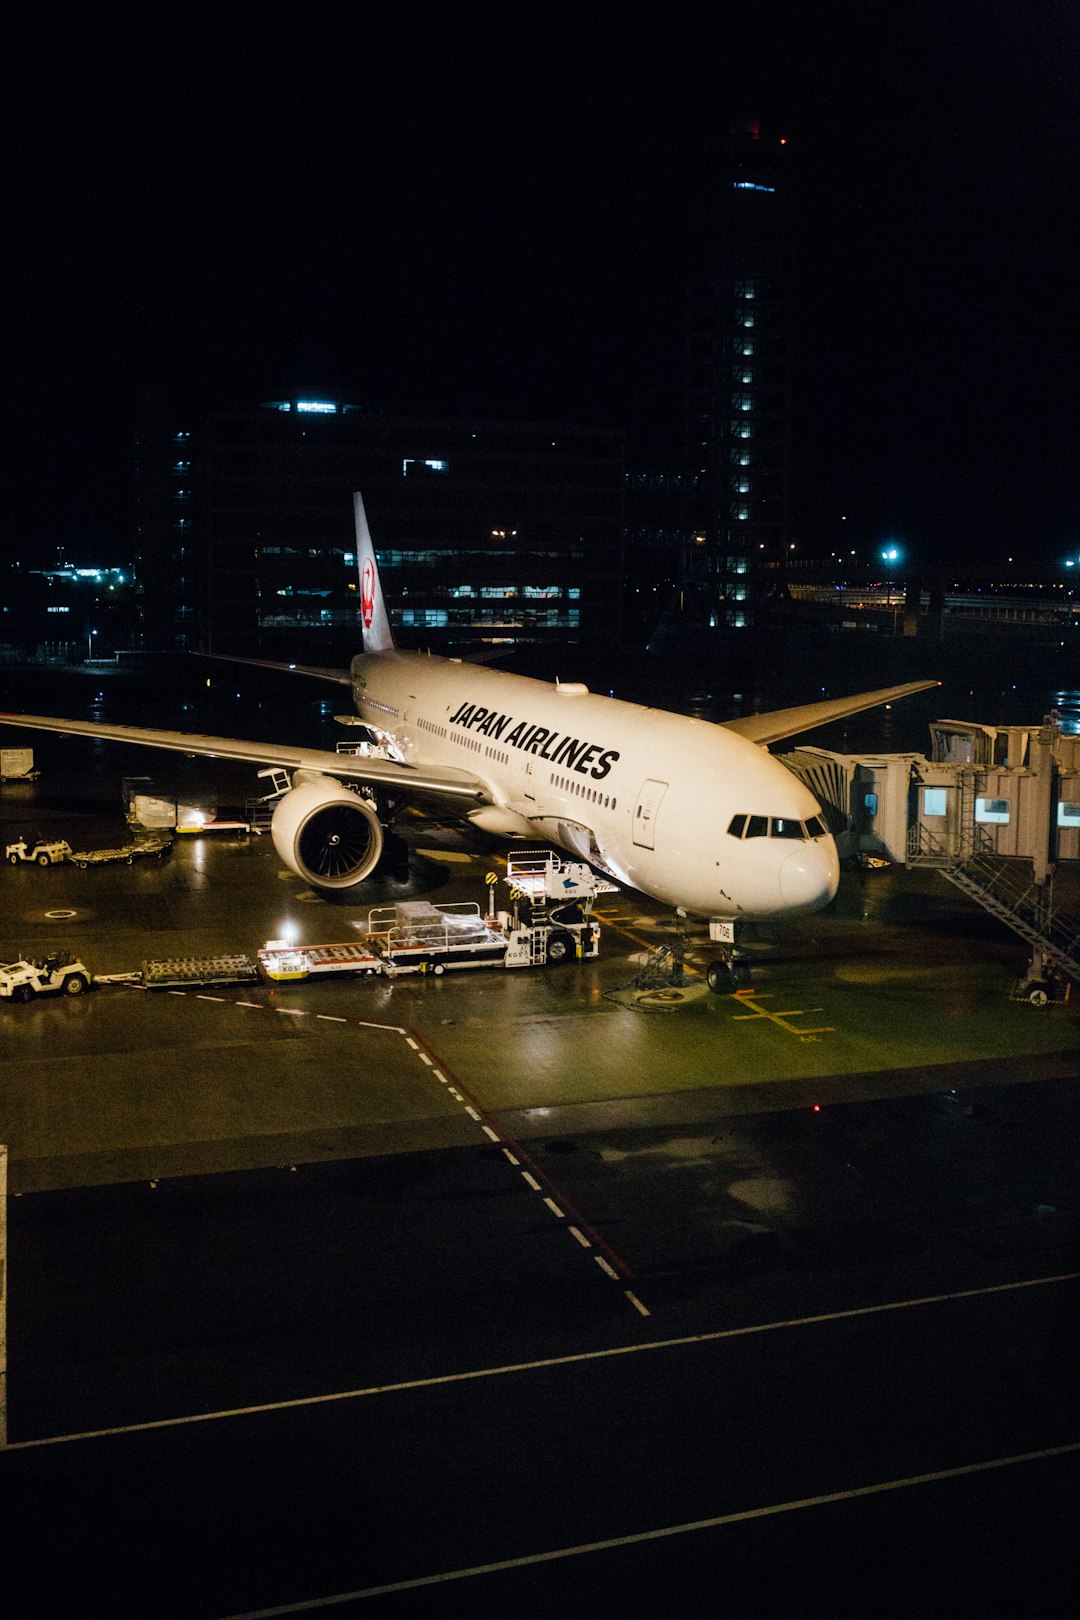 white Japan Airlines at airport during nighttime